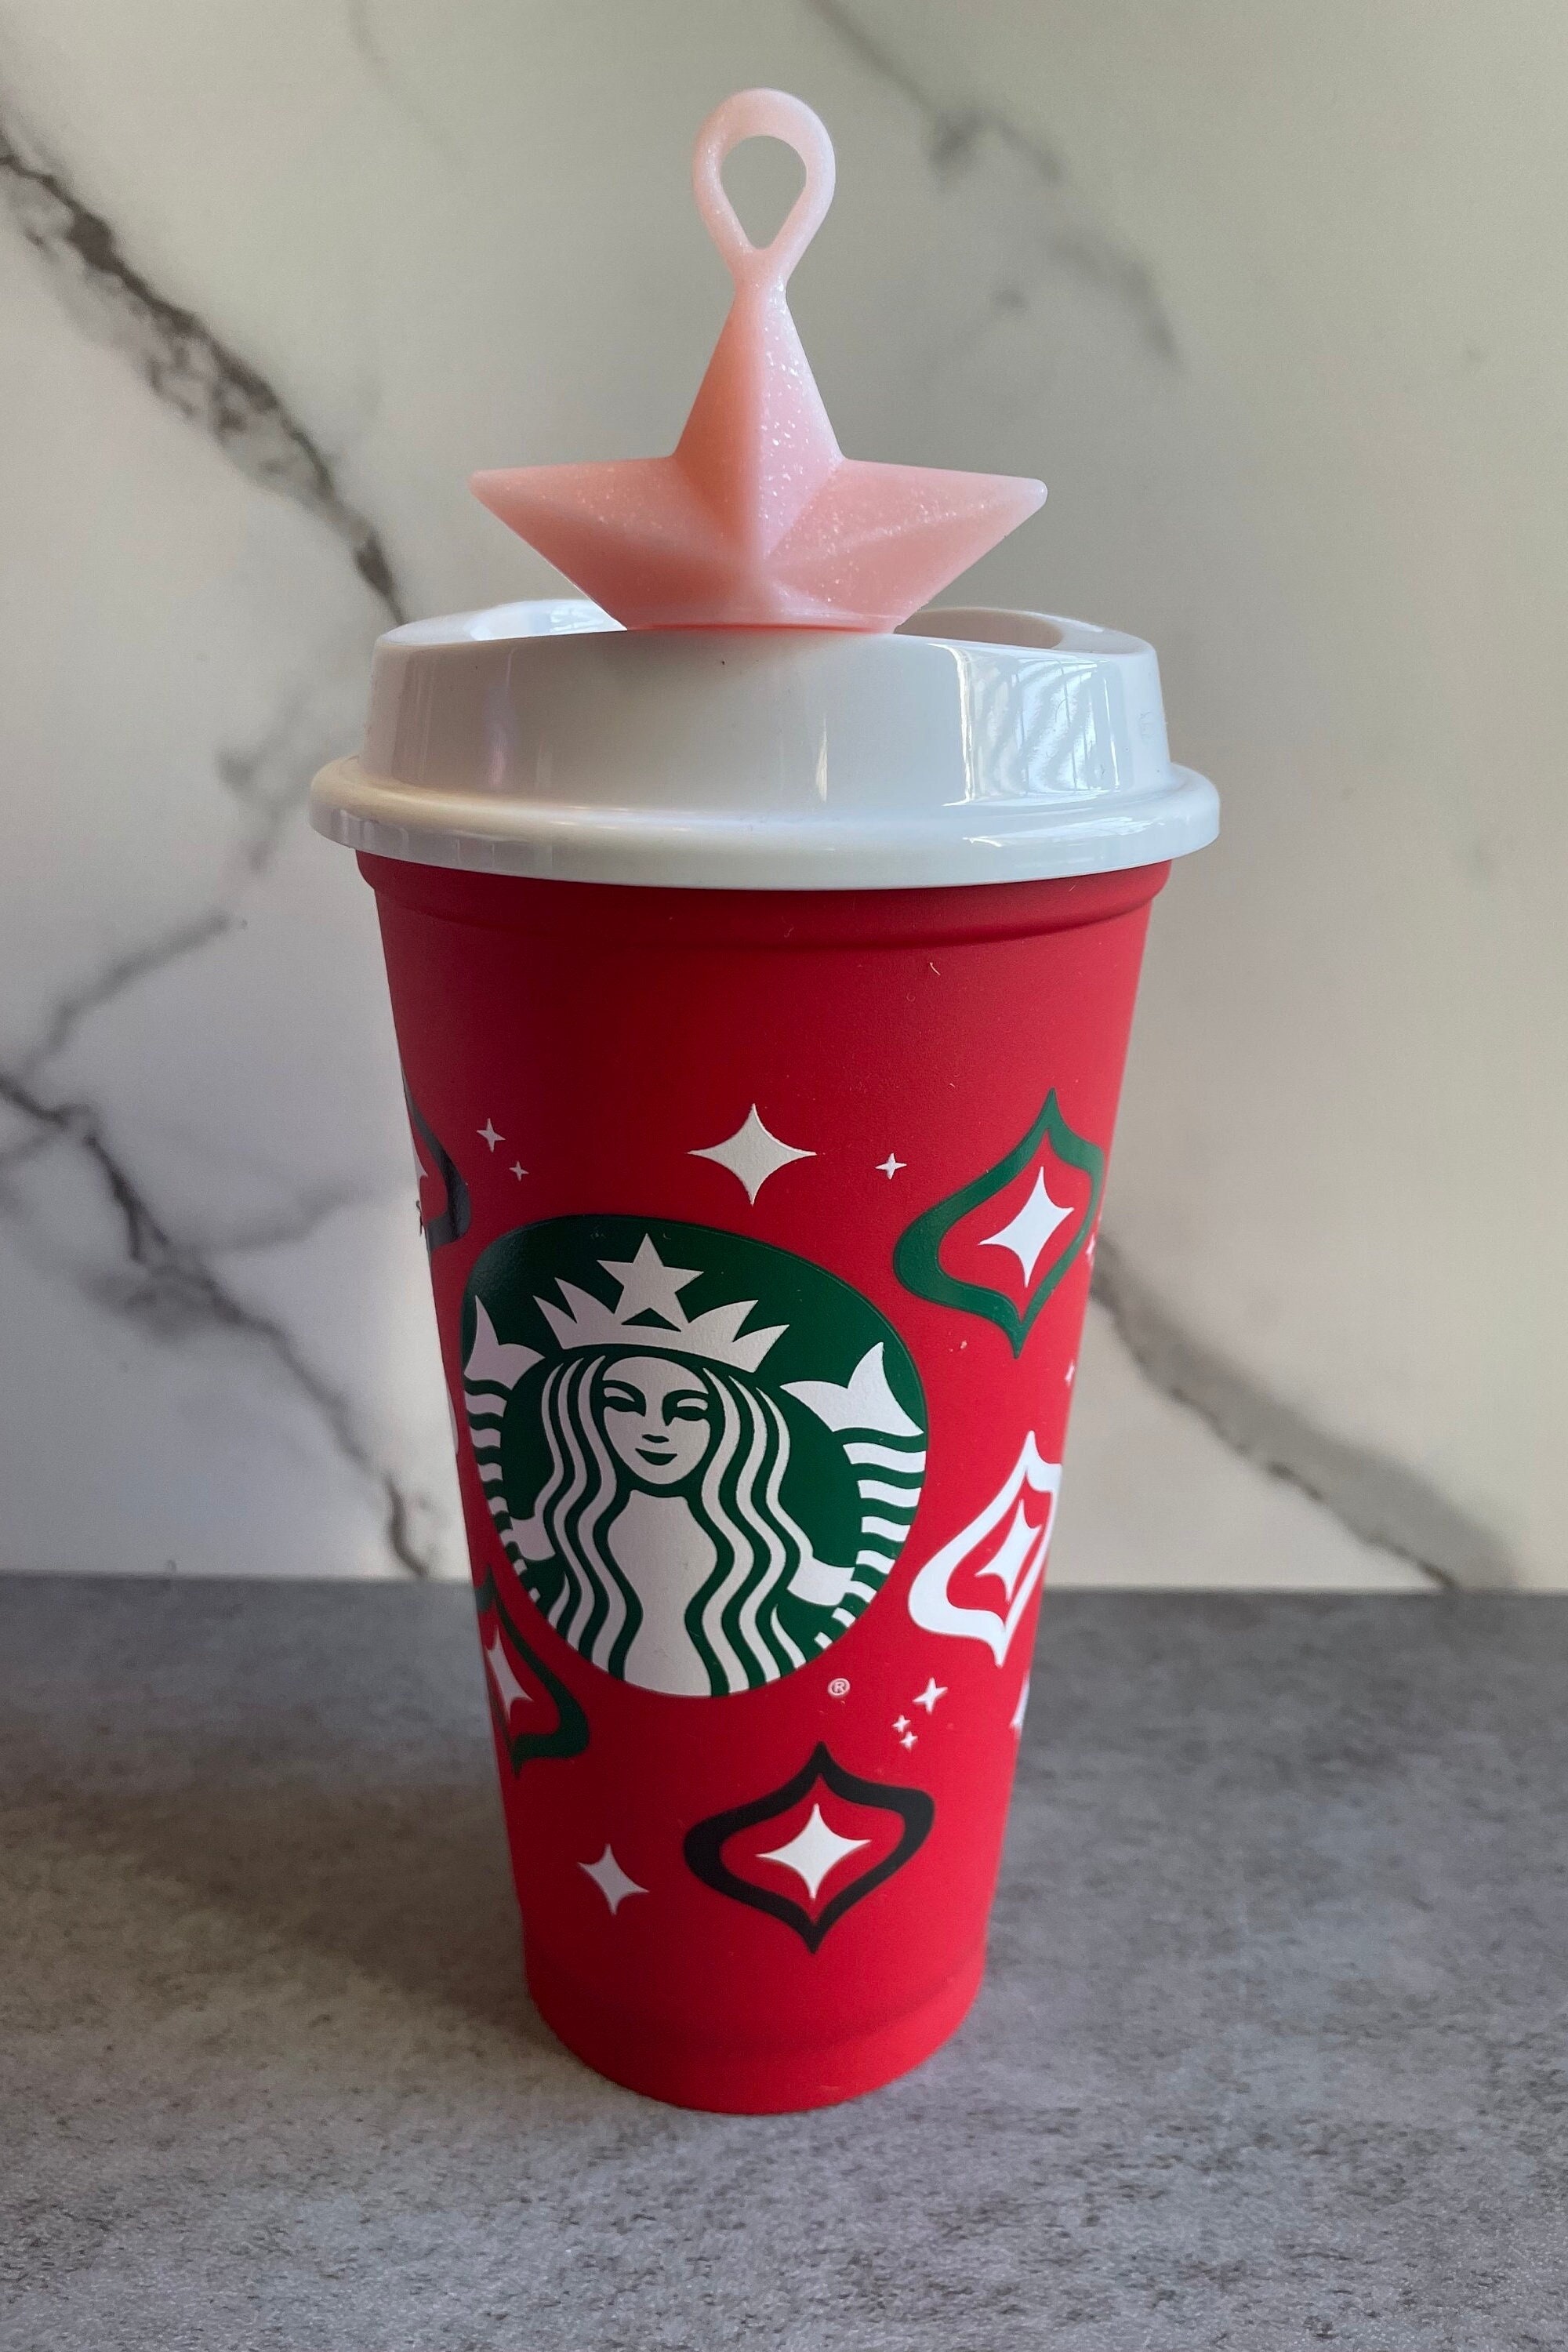 Starbucks Reusable Hot Cup Coffee STOPPER - Seals into cup lid - Avoid  spills